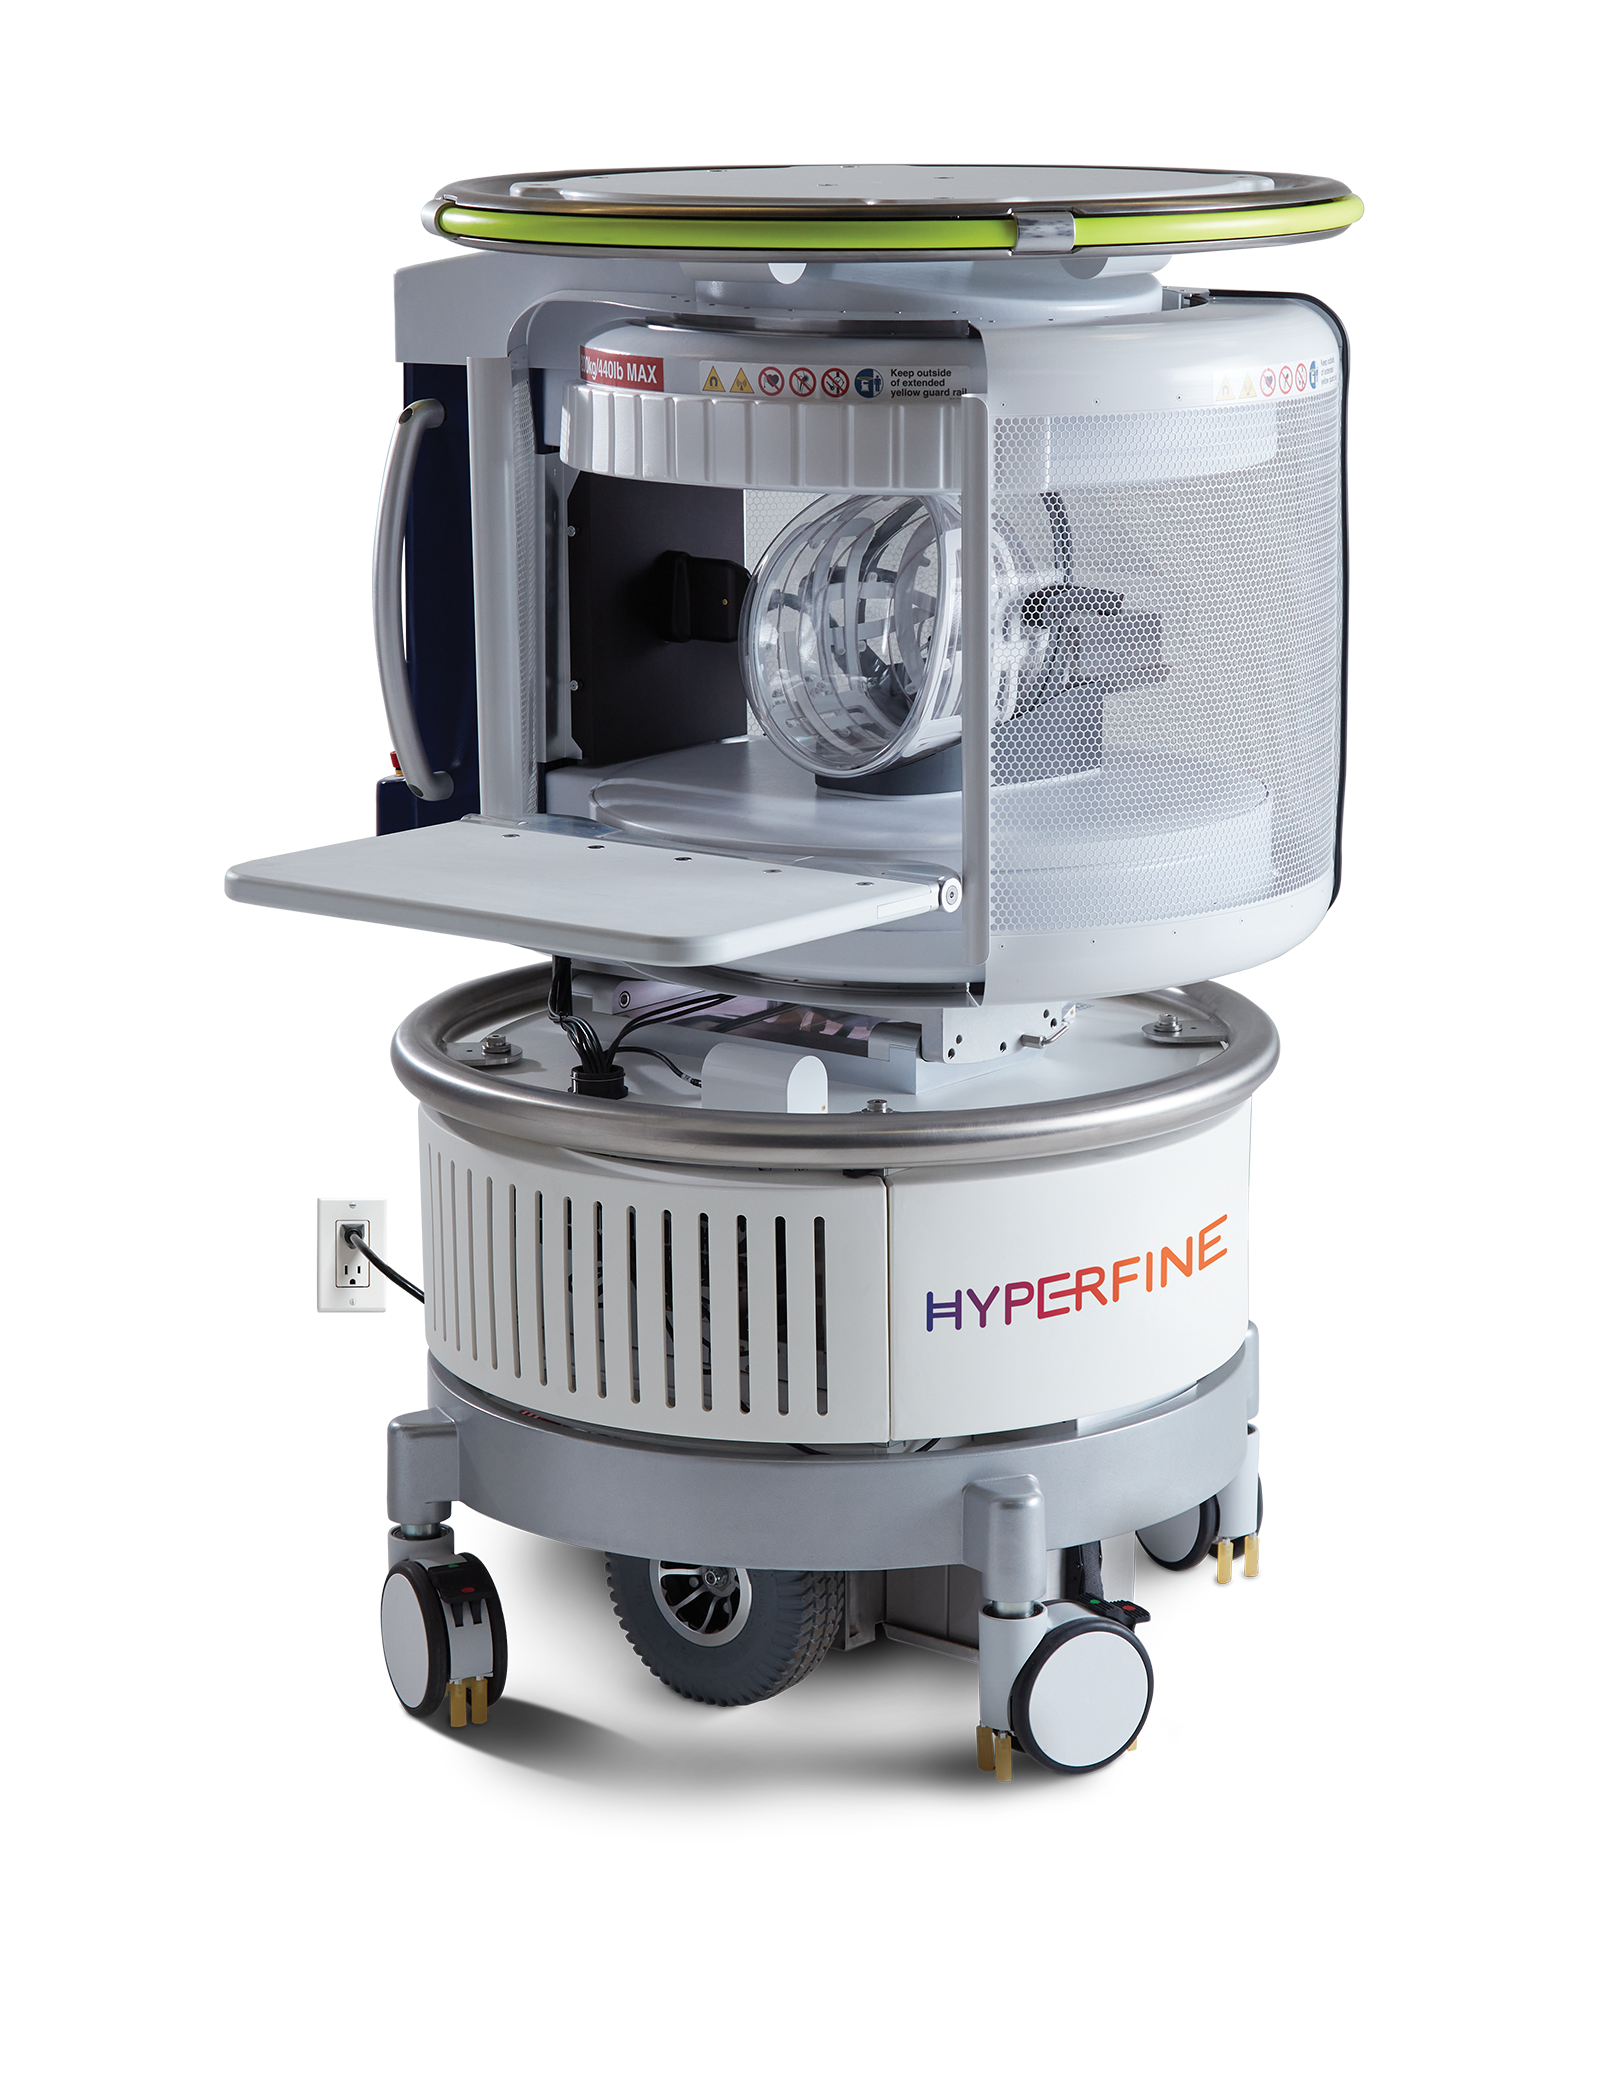 New capabilities in the radiology ecosystem have emerged courtesy of the launch of Hyperfine’s Swoop™ Portable MR imaging system.